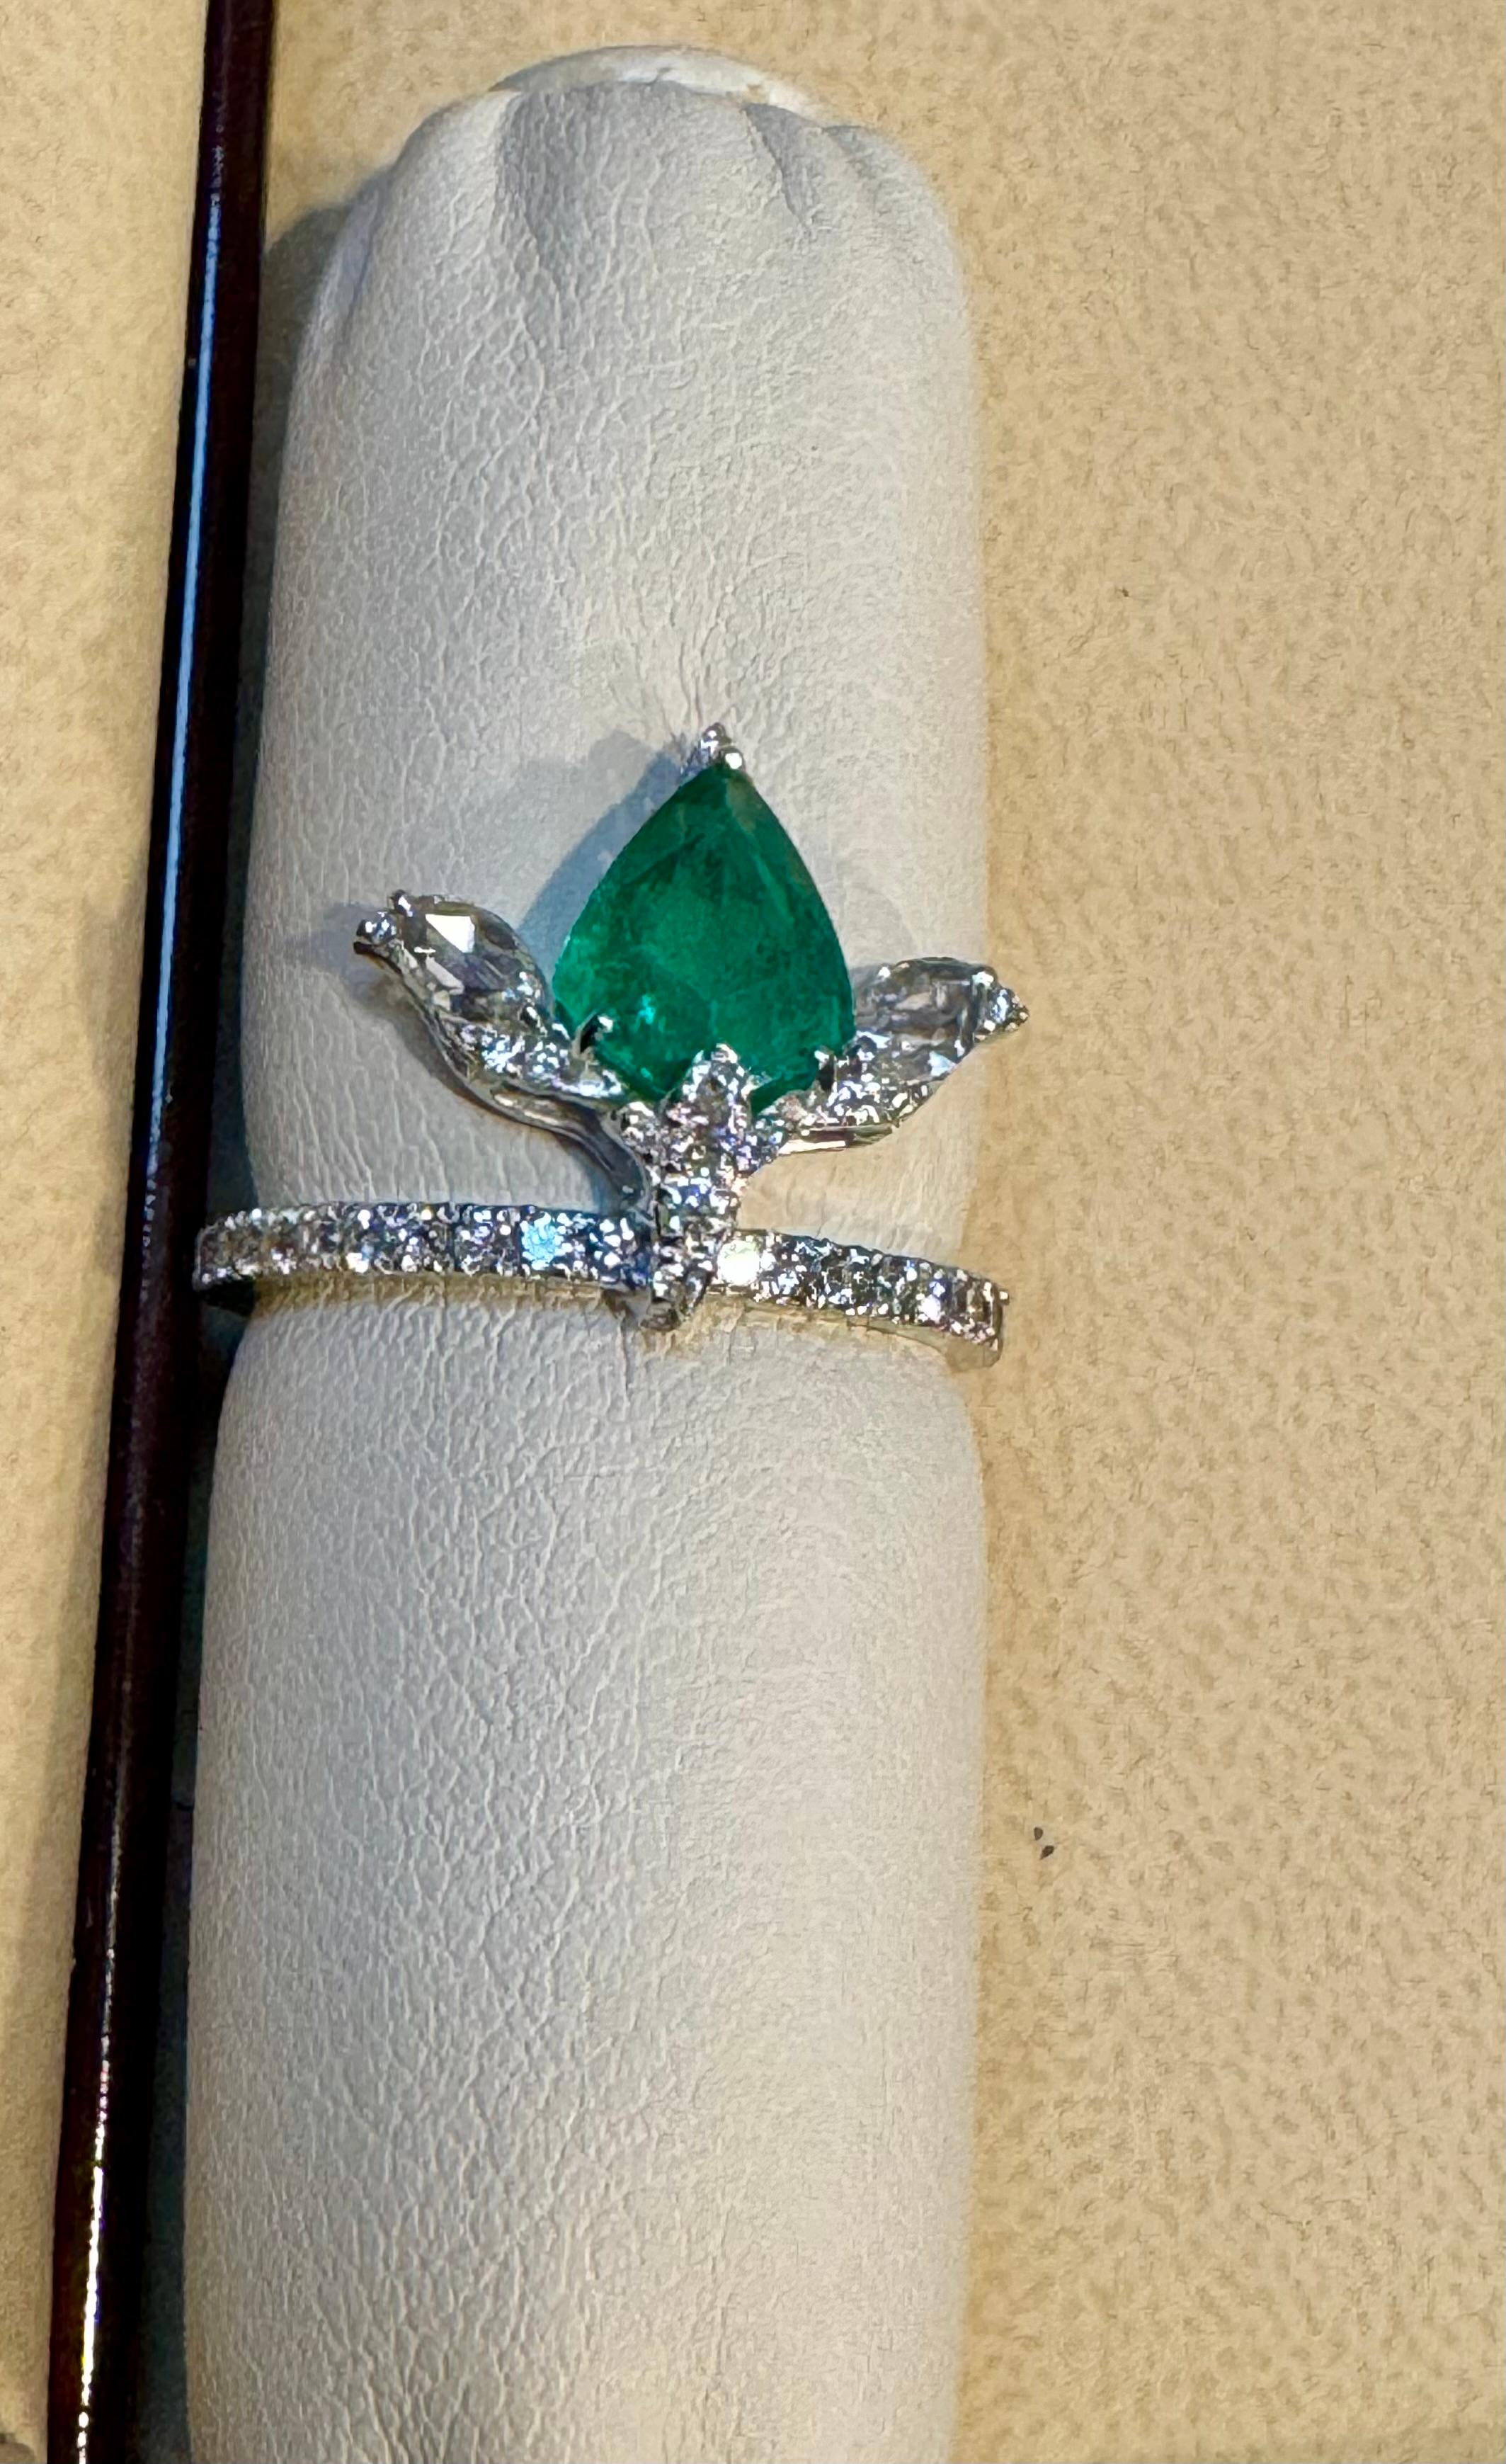 Women's 1.2 Ct Finest Zambian Pear Emerald & 1 Ct Diamond Ring in 18 Kt Gold Size 6.5 For Sale